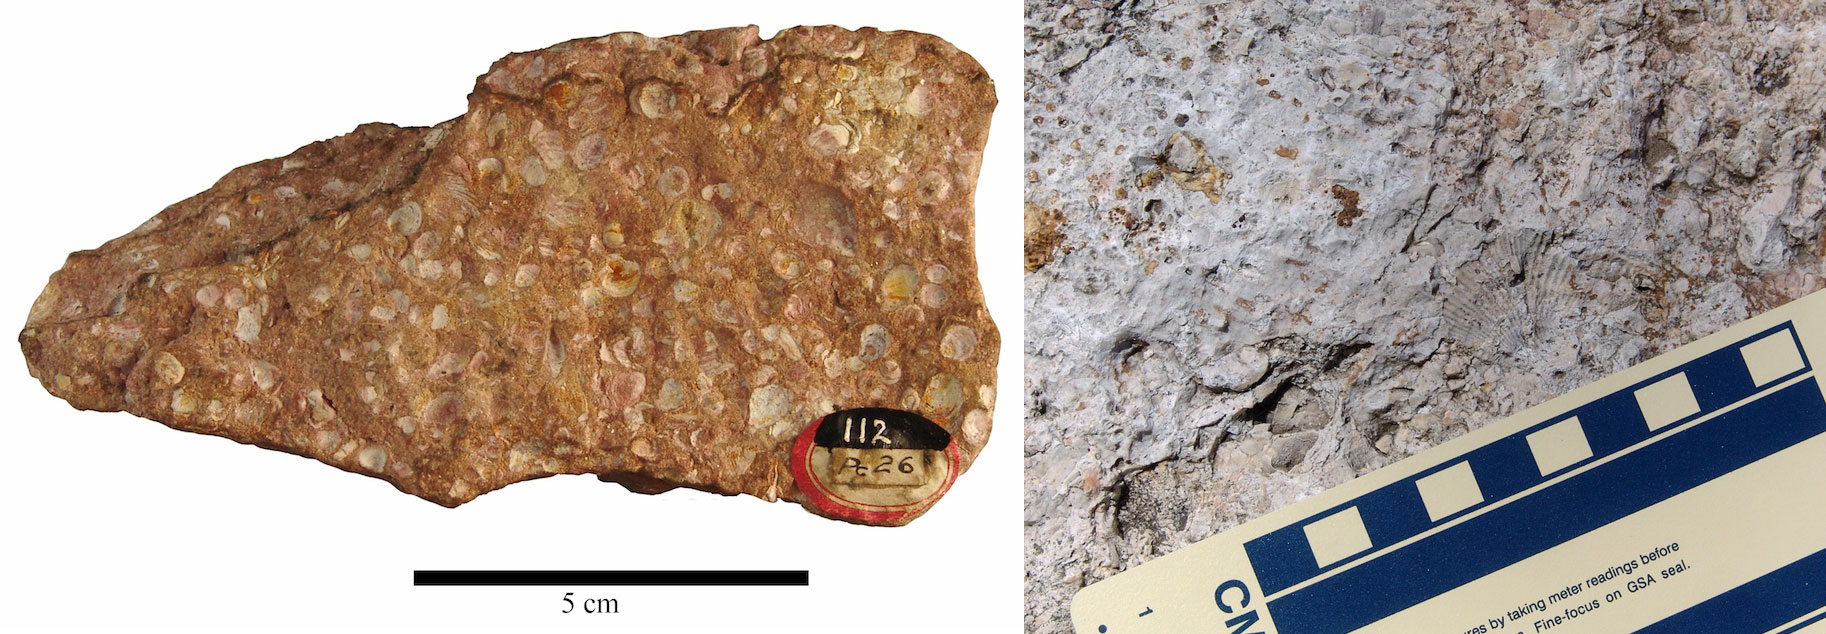 Two-panel image showing photographs of early Paleozoic fossils from South Dakota. Panel 1: Photo of a rock from the Cambrian Deadwood Formation with abundant small shells preserved on its surface. Panel 2: Photograph of a piece of Ordovician Whitewood Formation with the impression of a small brachiopod shell on its surface.